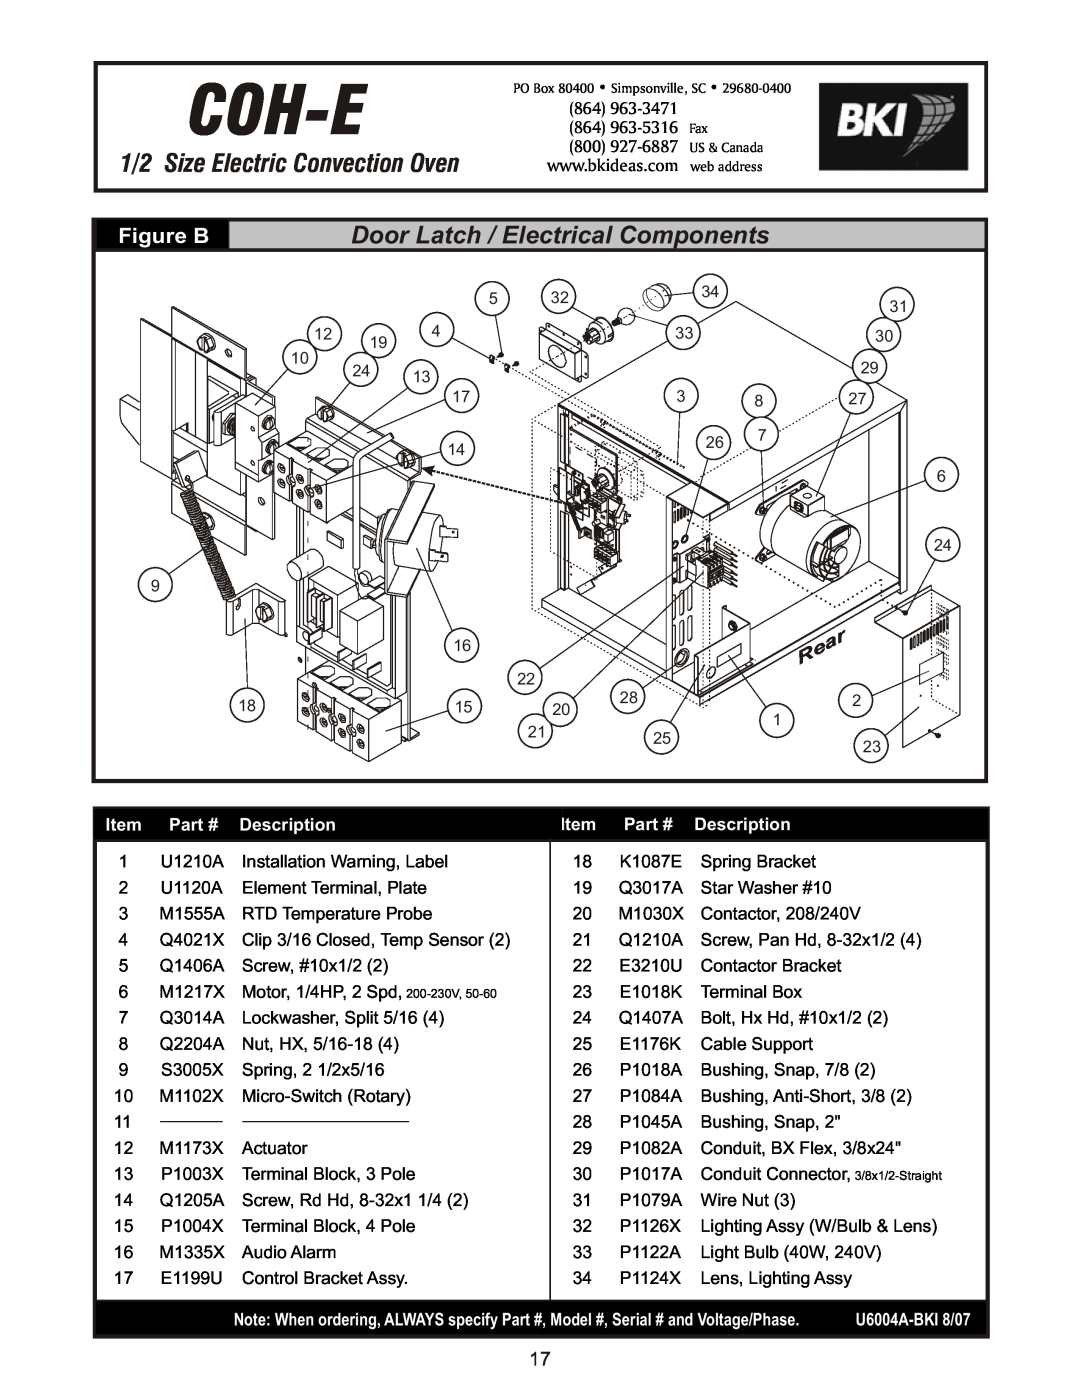 Bakers Pride Oven COH-ES Door Latch / Electrical Components, Coh-E, 1/2 Size Electric Convection Oven, Figure B, Page 2 of 